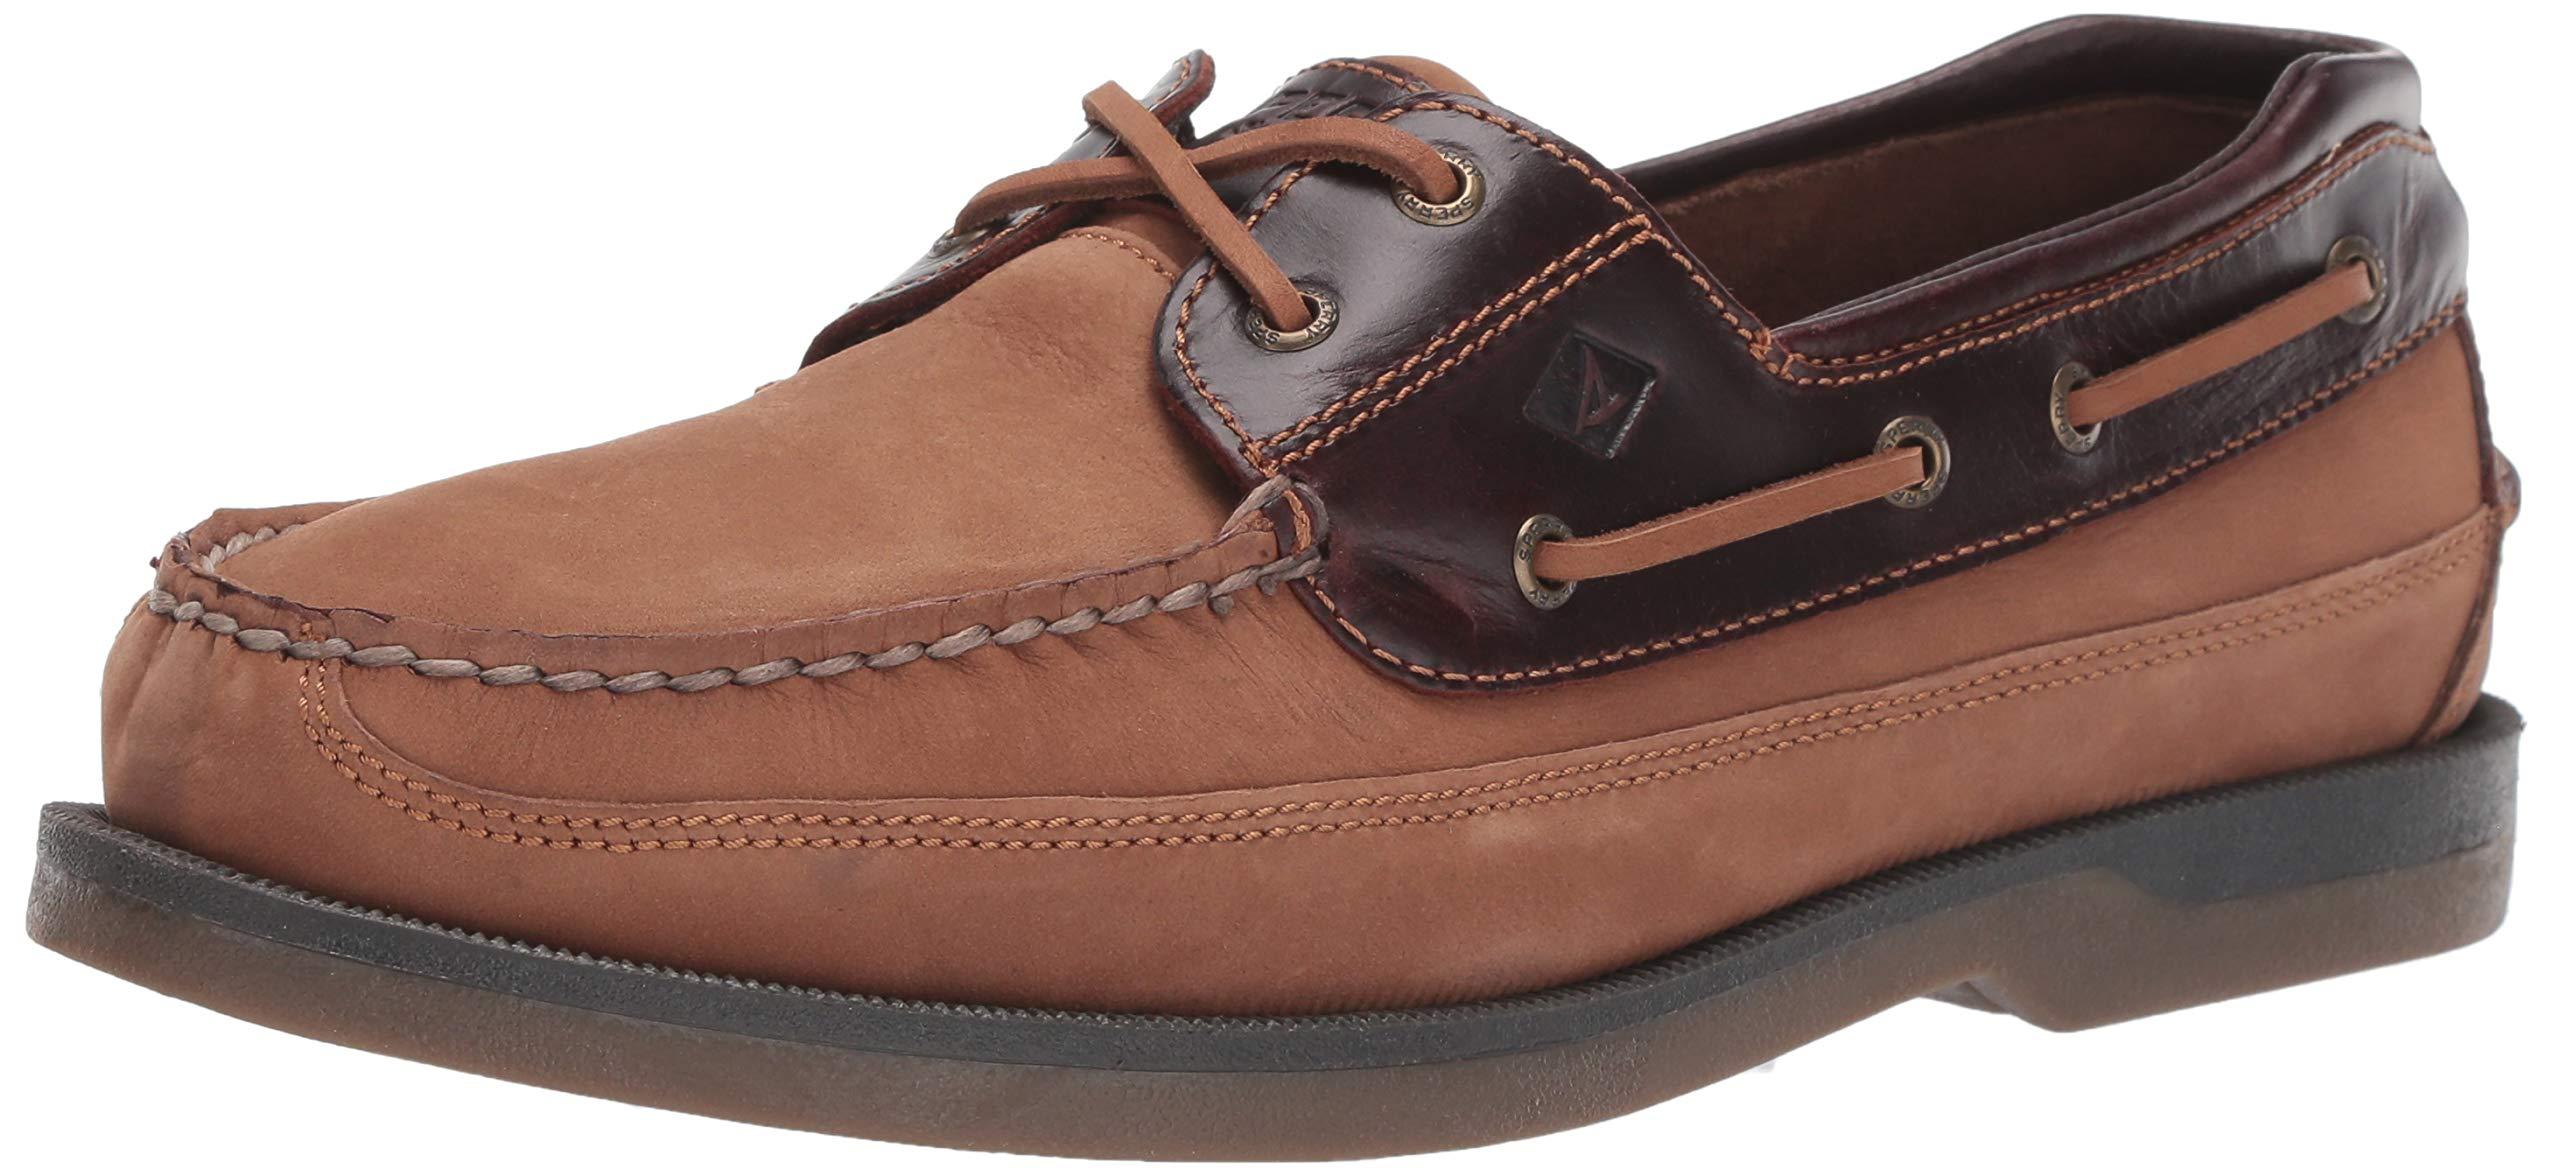 Sperry Top-Sider Leather Mako 2-eye Boat Shoe in Brown for Men - Lyst